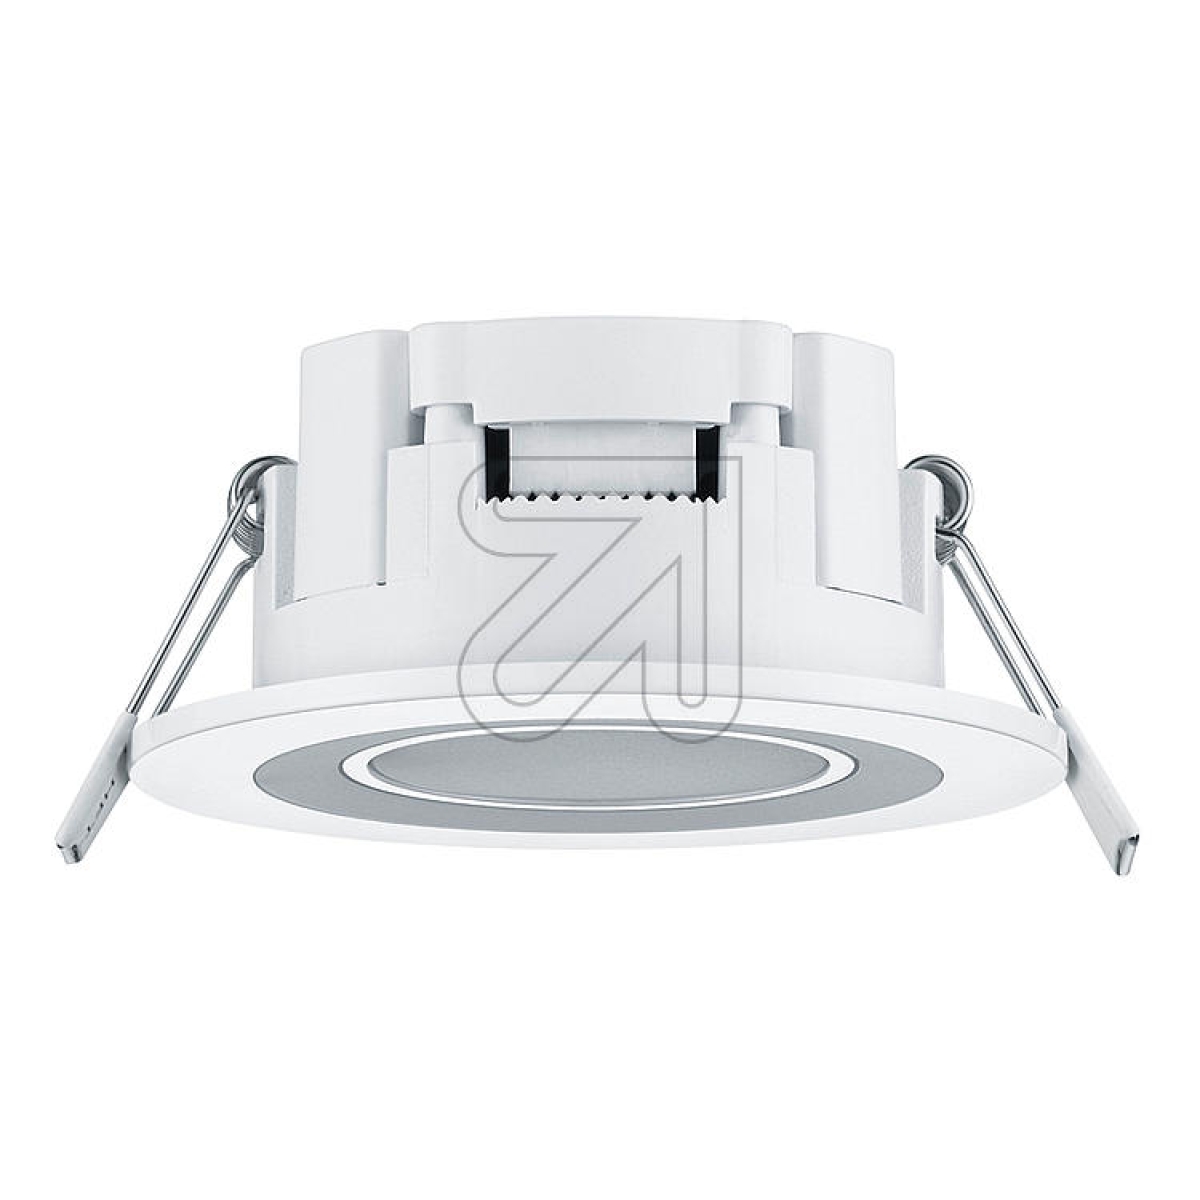 TRIOLED recessed light white Core 3000K 5W 652510131Article-No: 668425